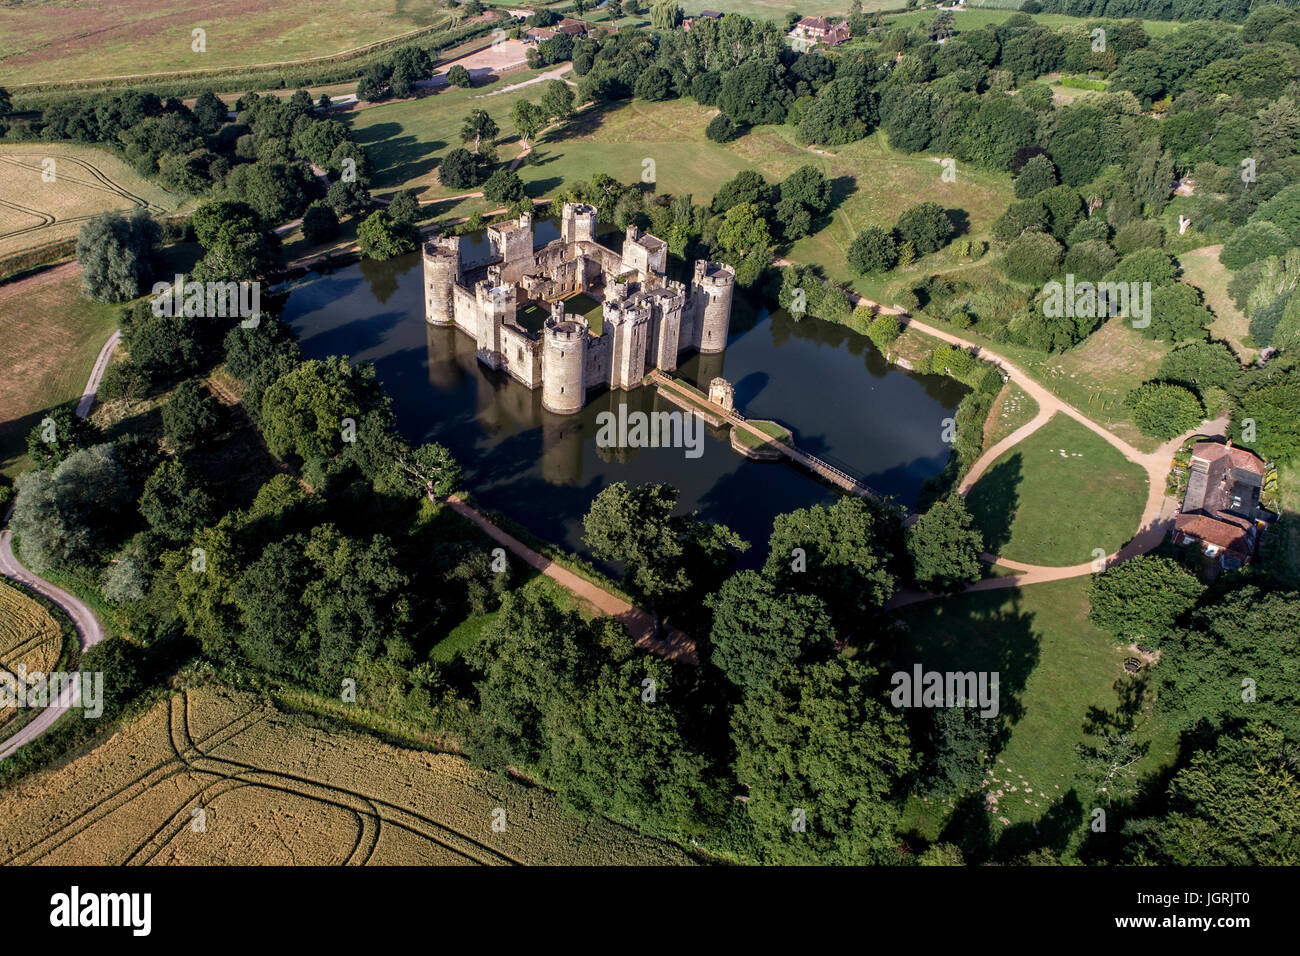 Aerial view of Bodiam Castle, Robertsbridge, East Sussex, UK. Historic popular tourist attraction. English Castle with moat surrounded by countryside Stock Photo